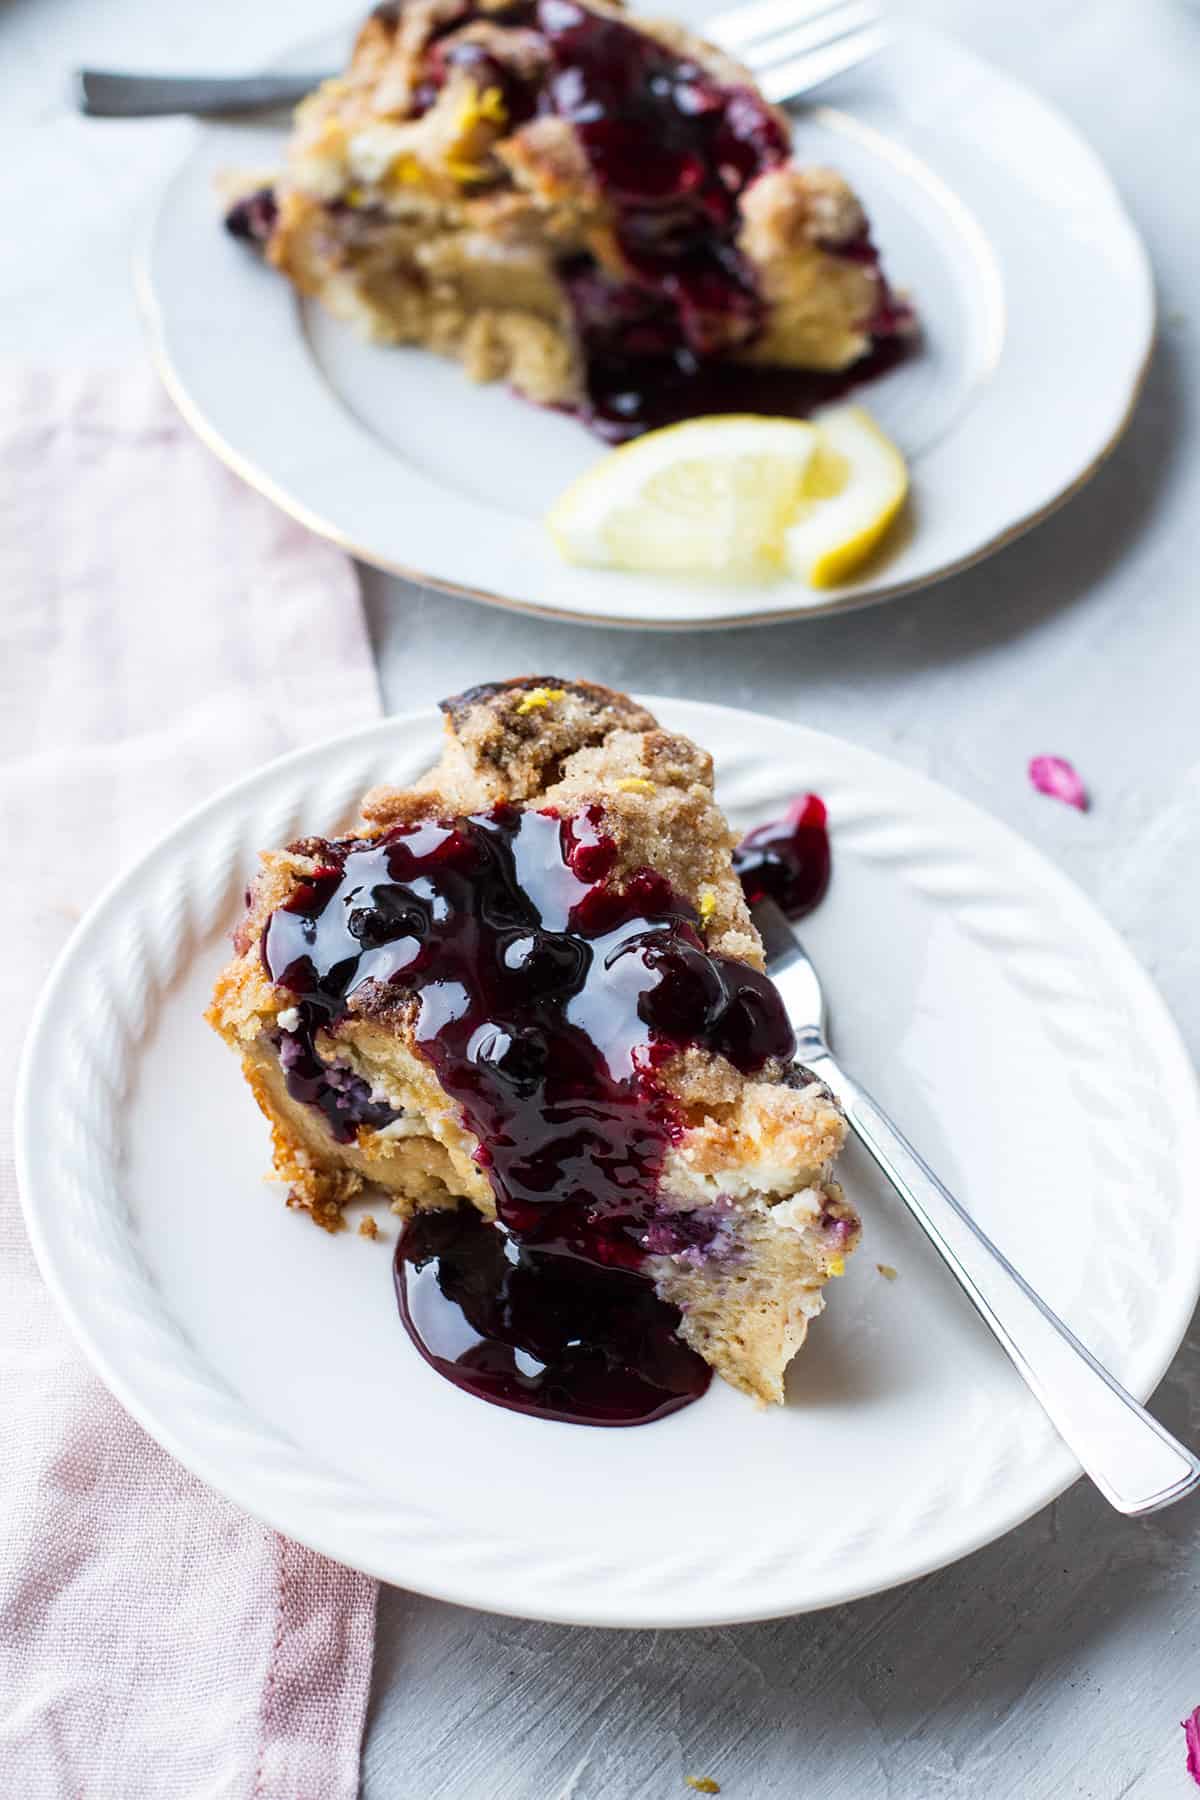 Slice of blueberry French toast topped with blueberry sauce.